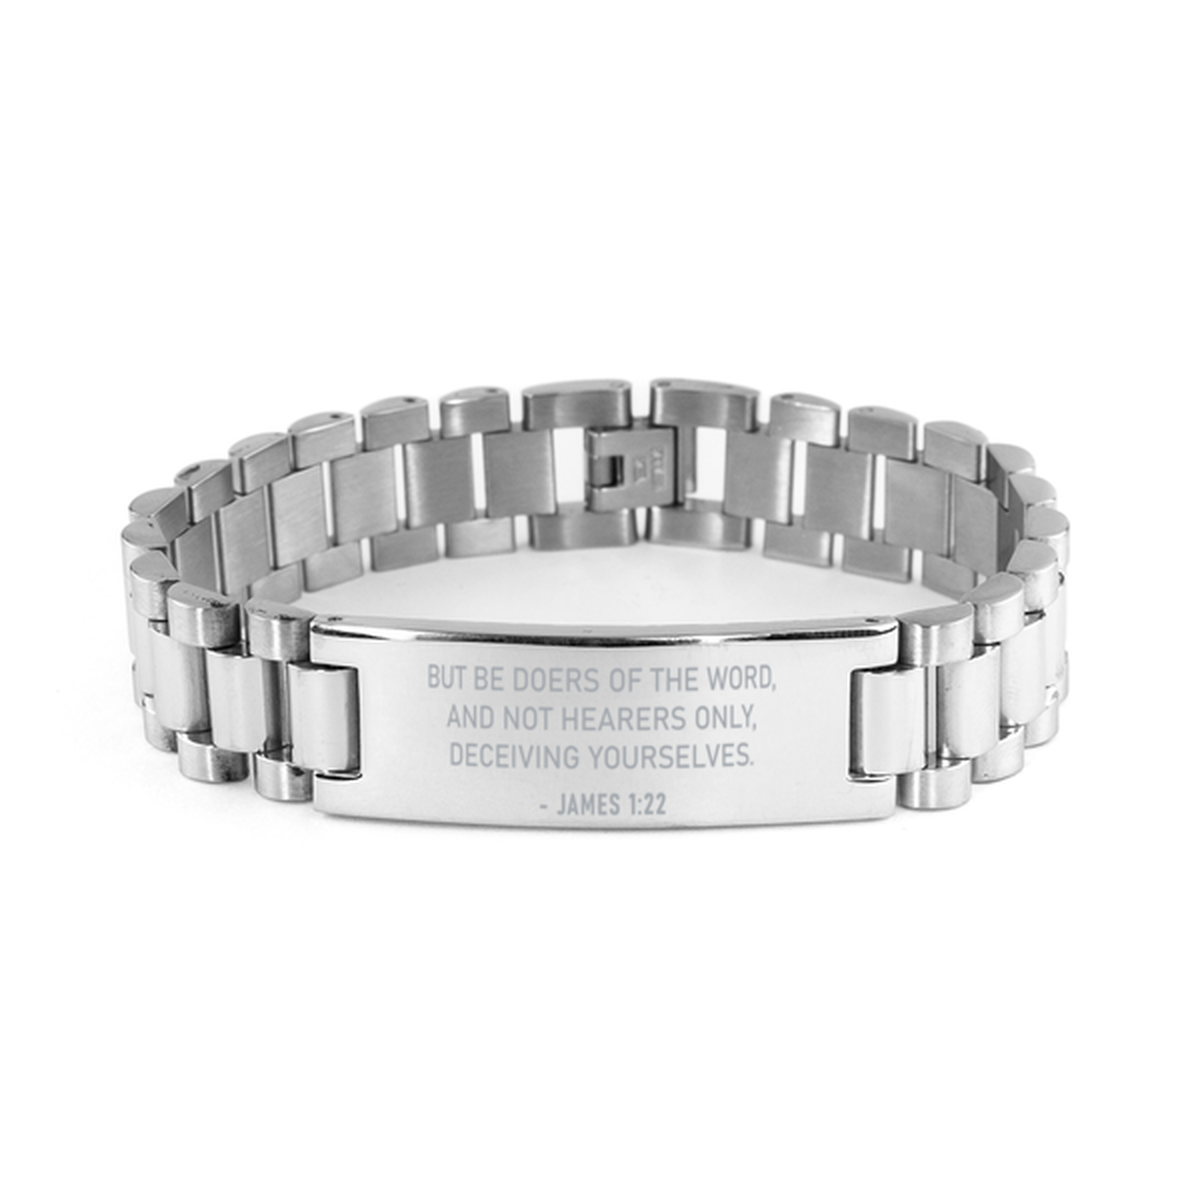 Christian Ladder Stainless Steel Bracelet, James 1:22 But Be Doers Of The Word, And Not Hearers Only, Motivational Bible Verse Gifts For Men Women